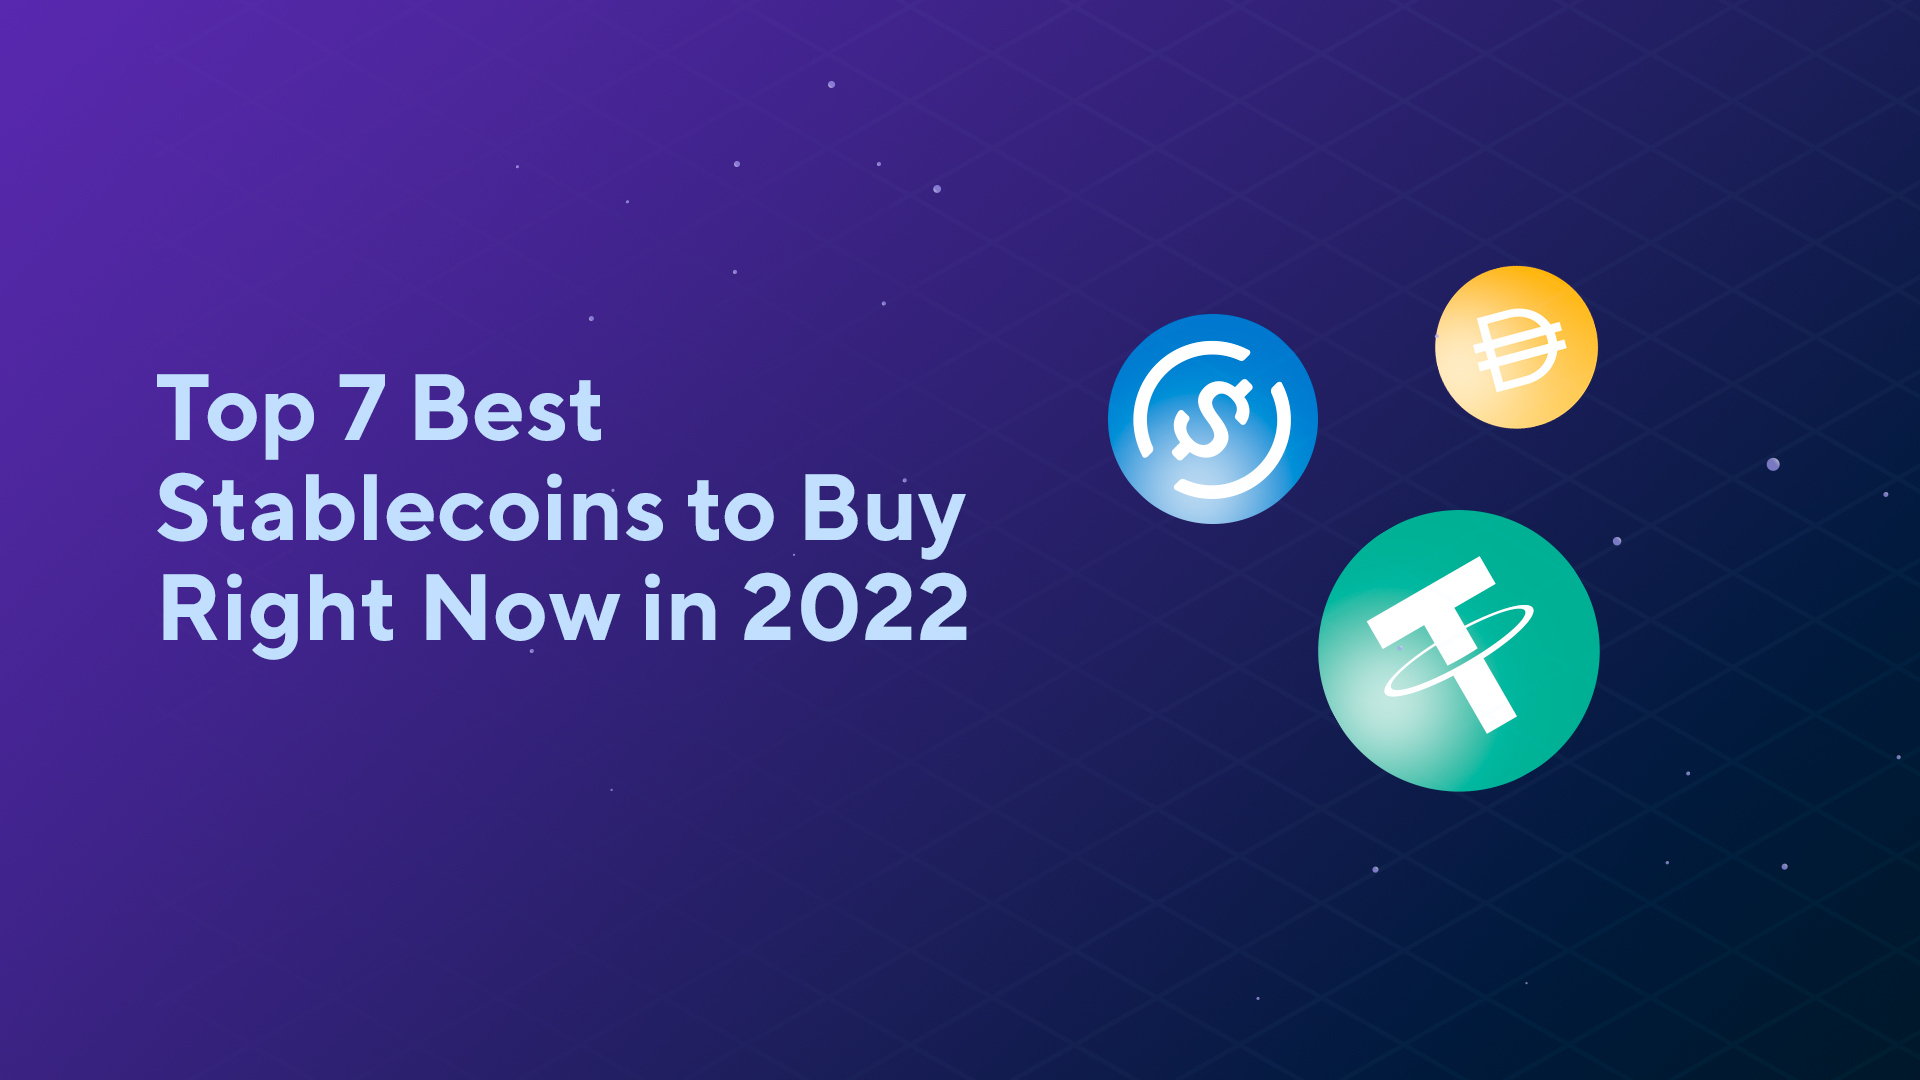 Top 7 Best Stablecoins to Buy Right Now in 2022